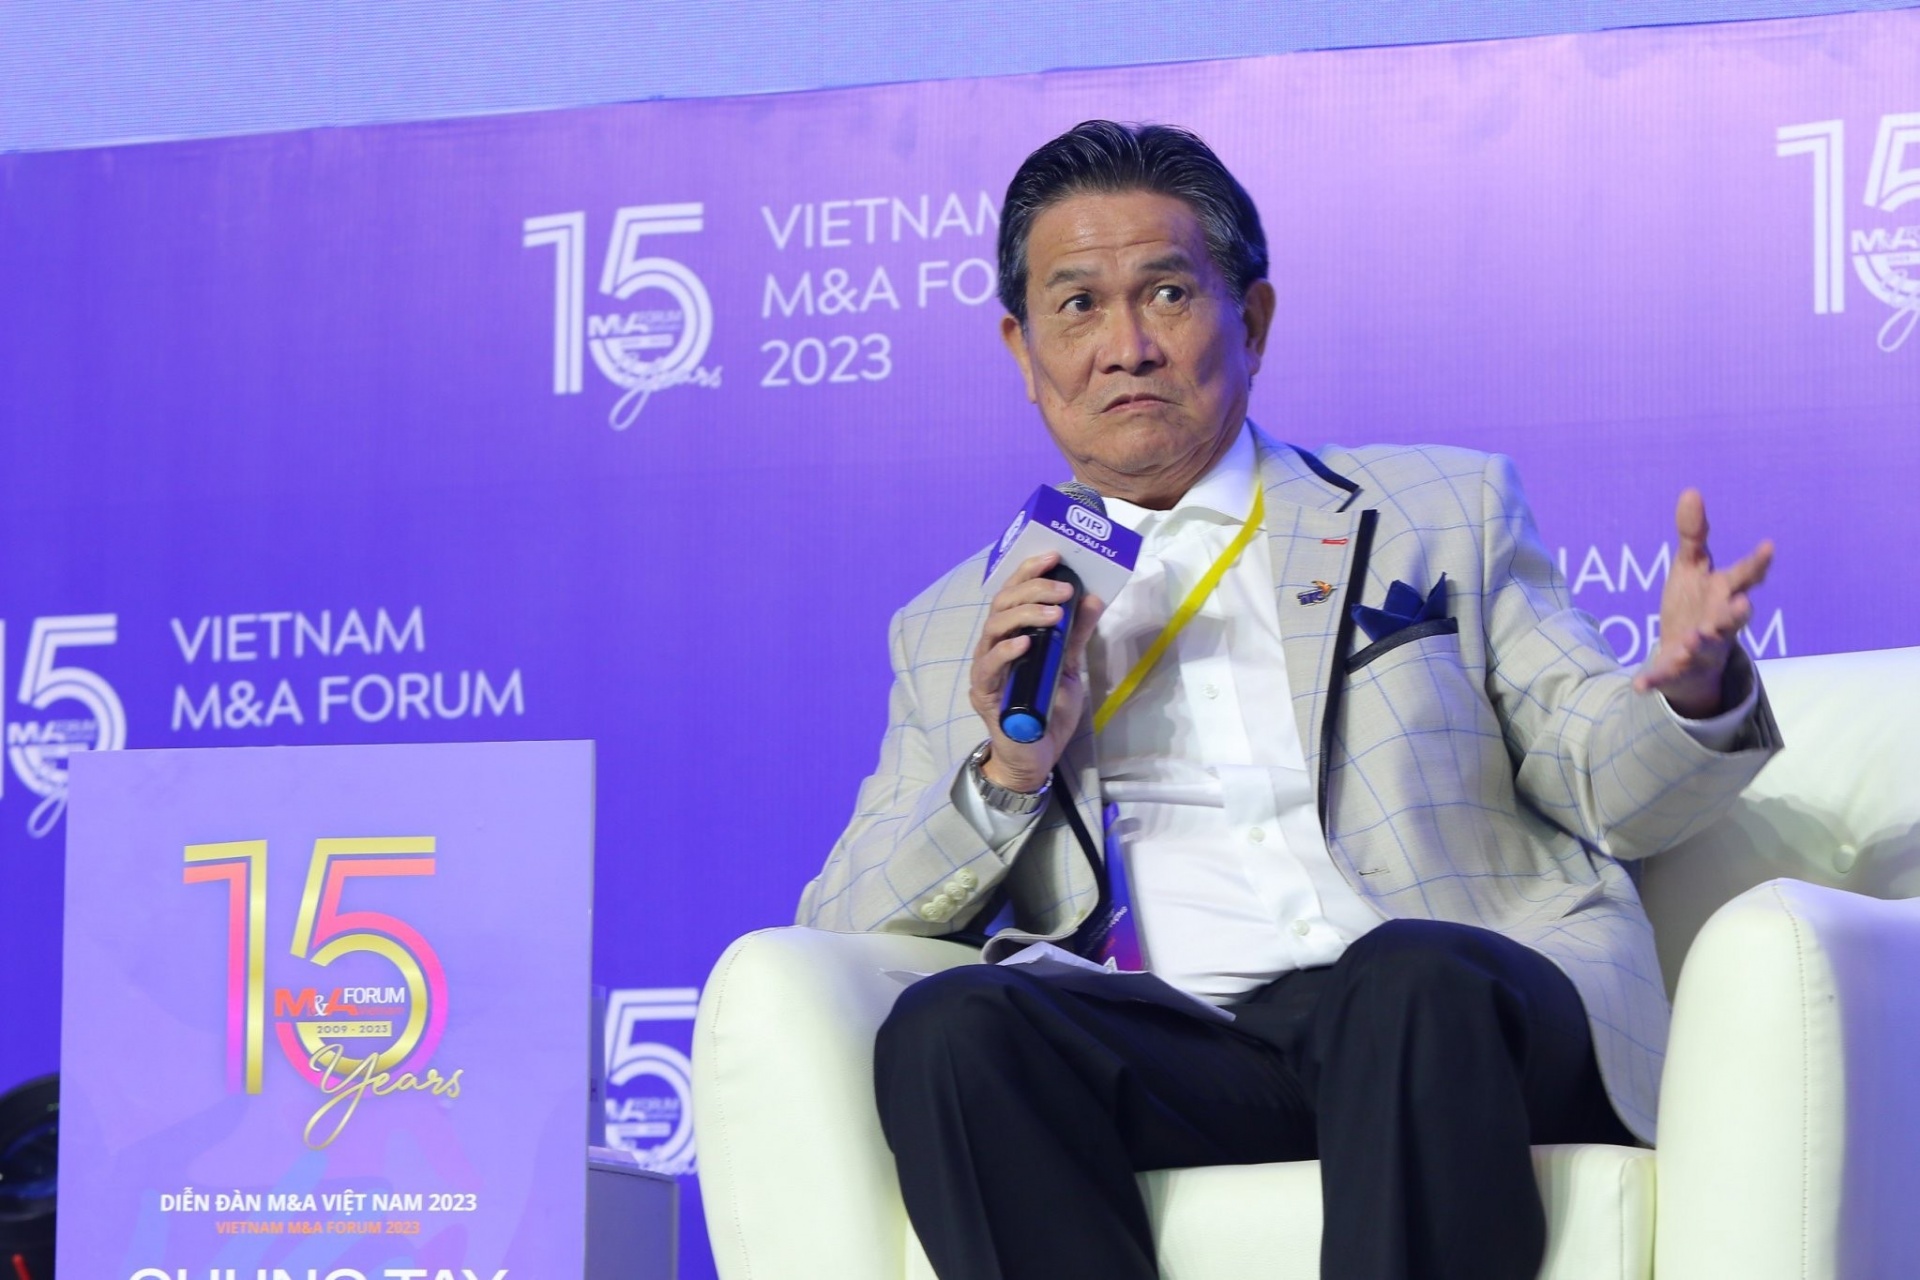 Collaborative growth in Vietnam's M&A ecosystem